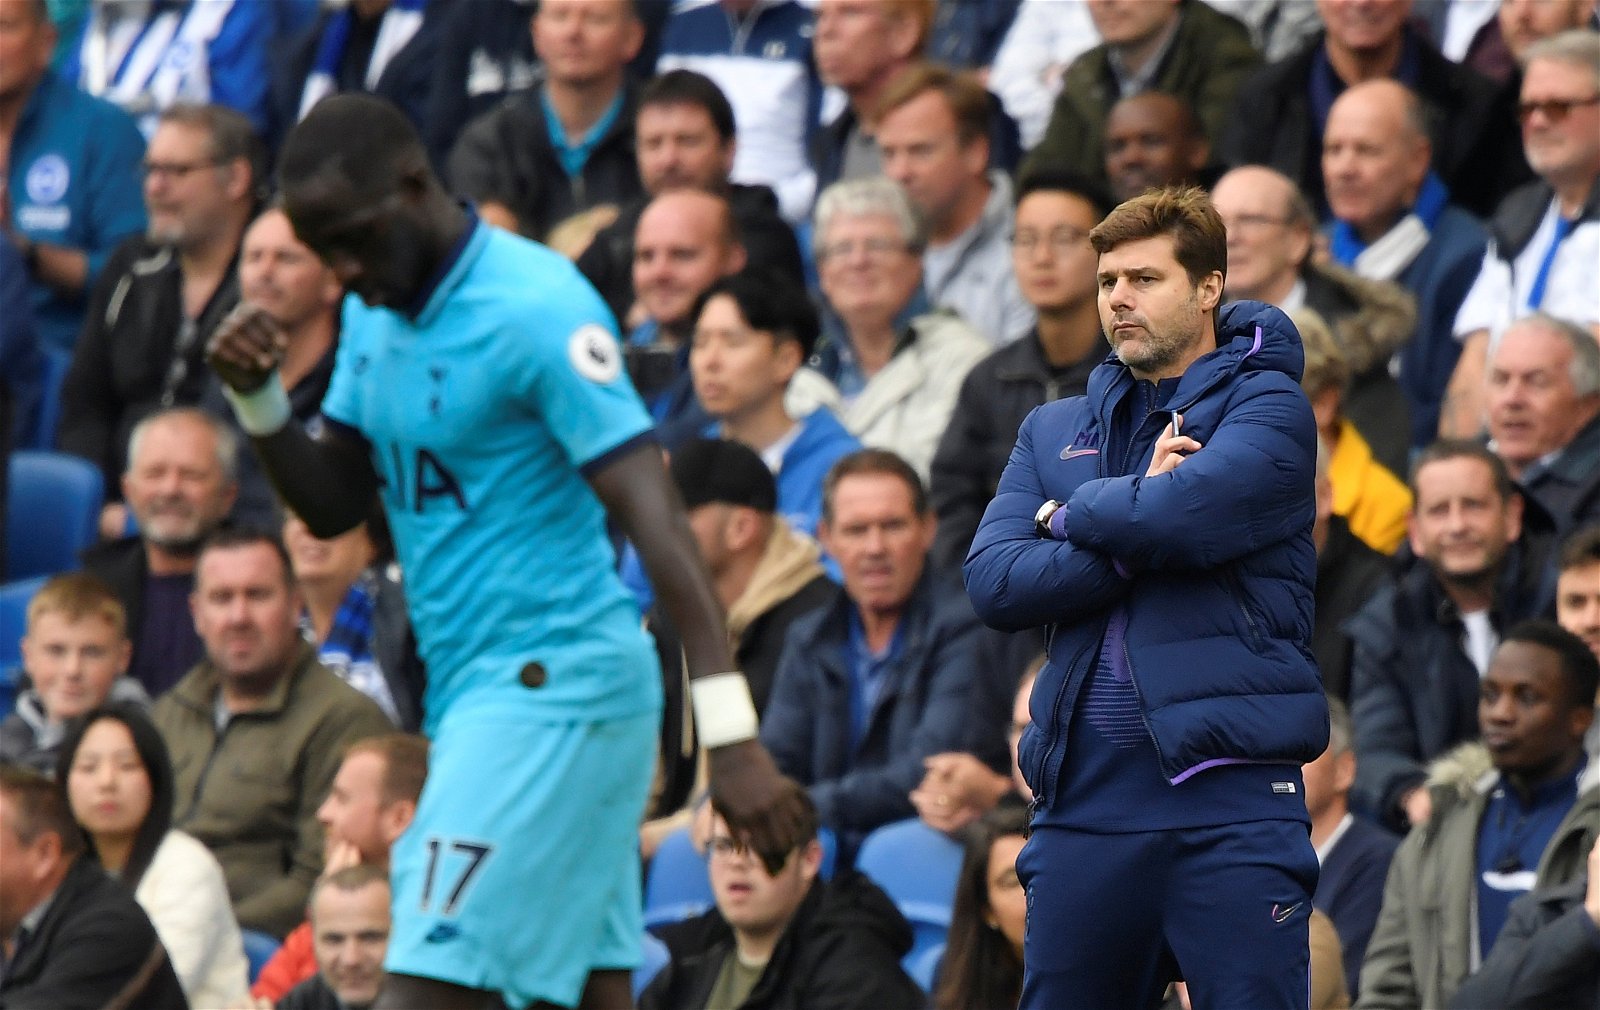 Poch has players he does not want: Levy